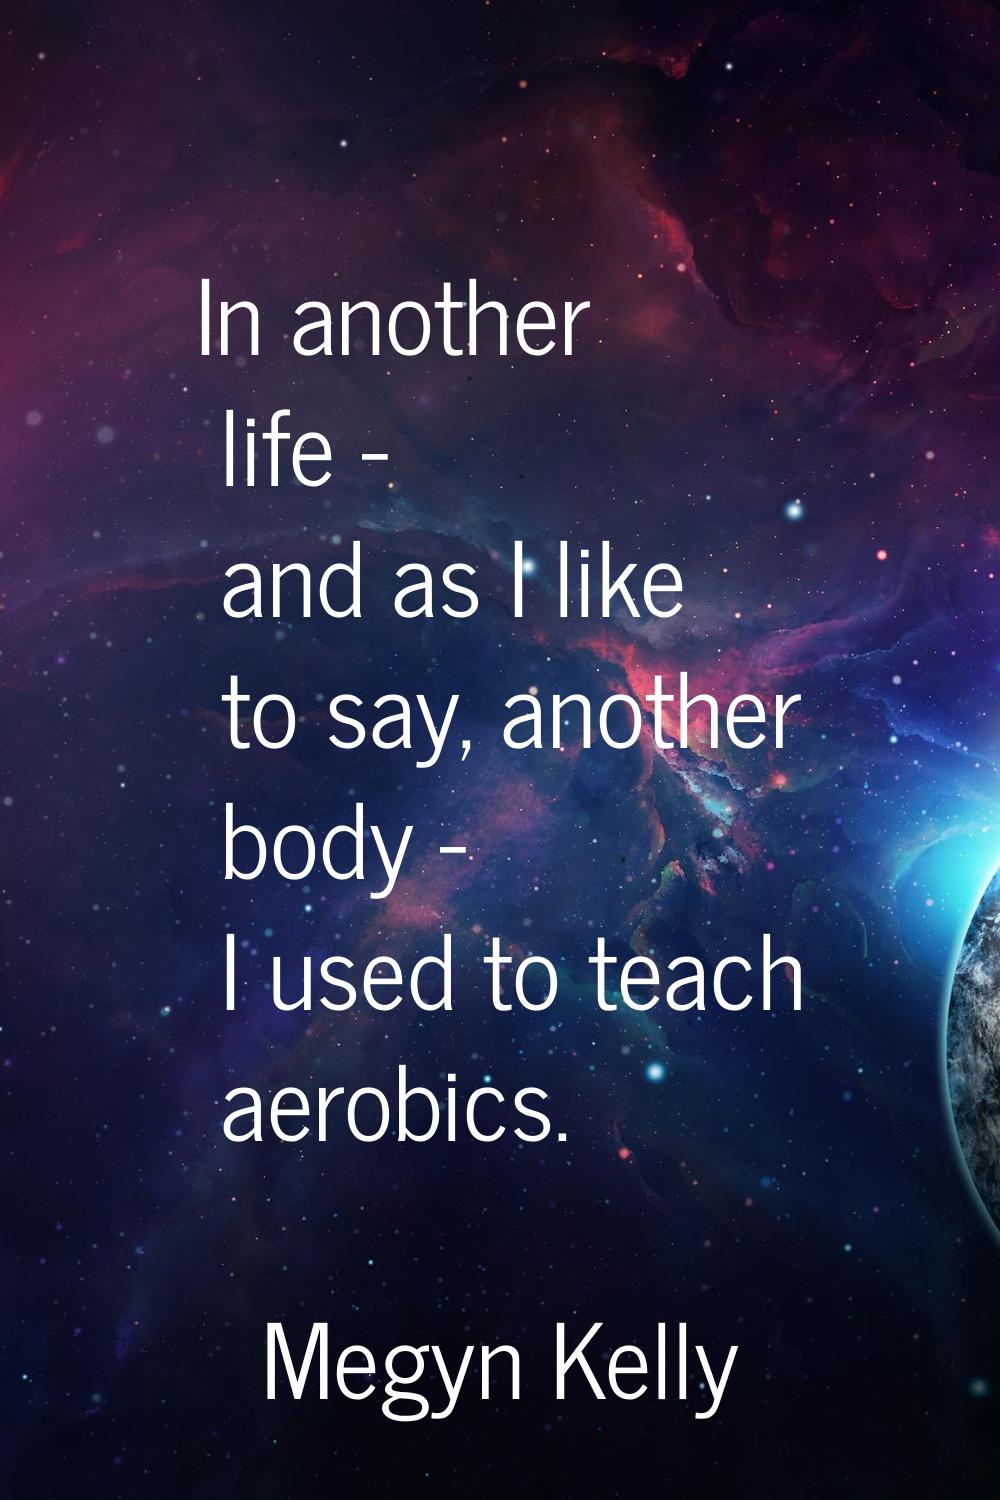 In another life - and as I like to say, another body - I used to teach aerobics.